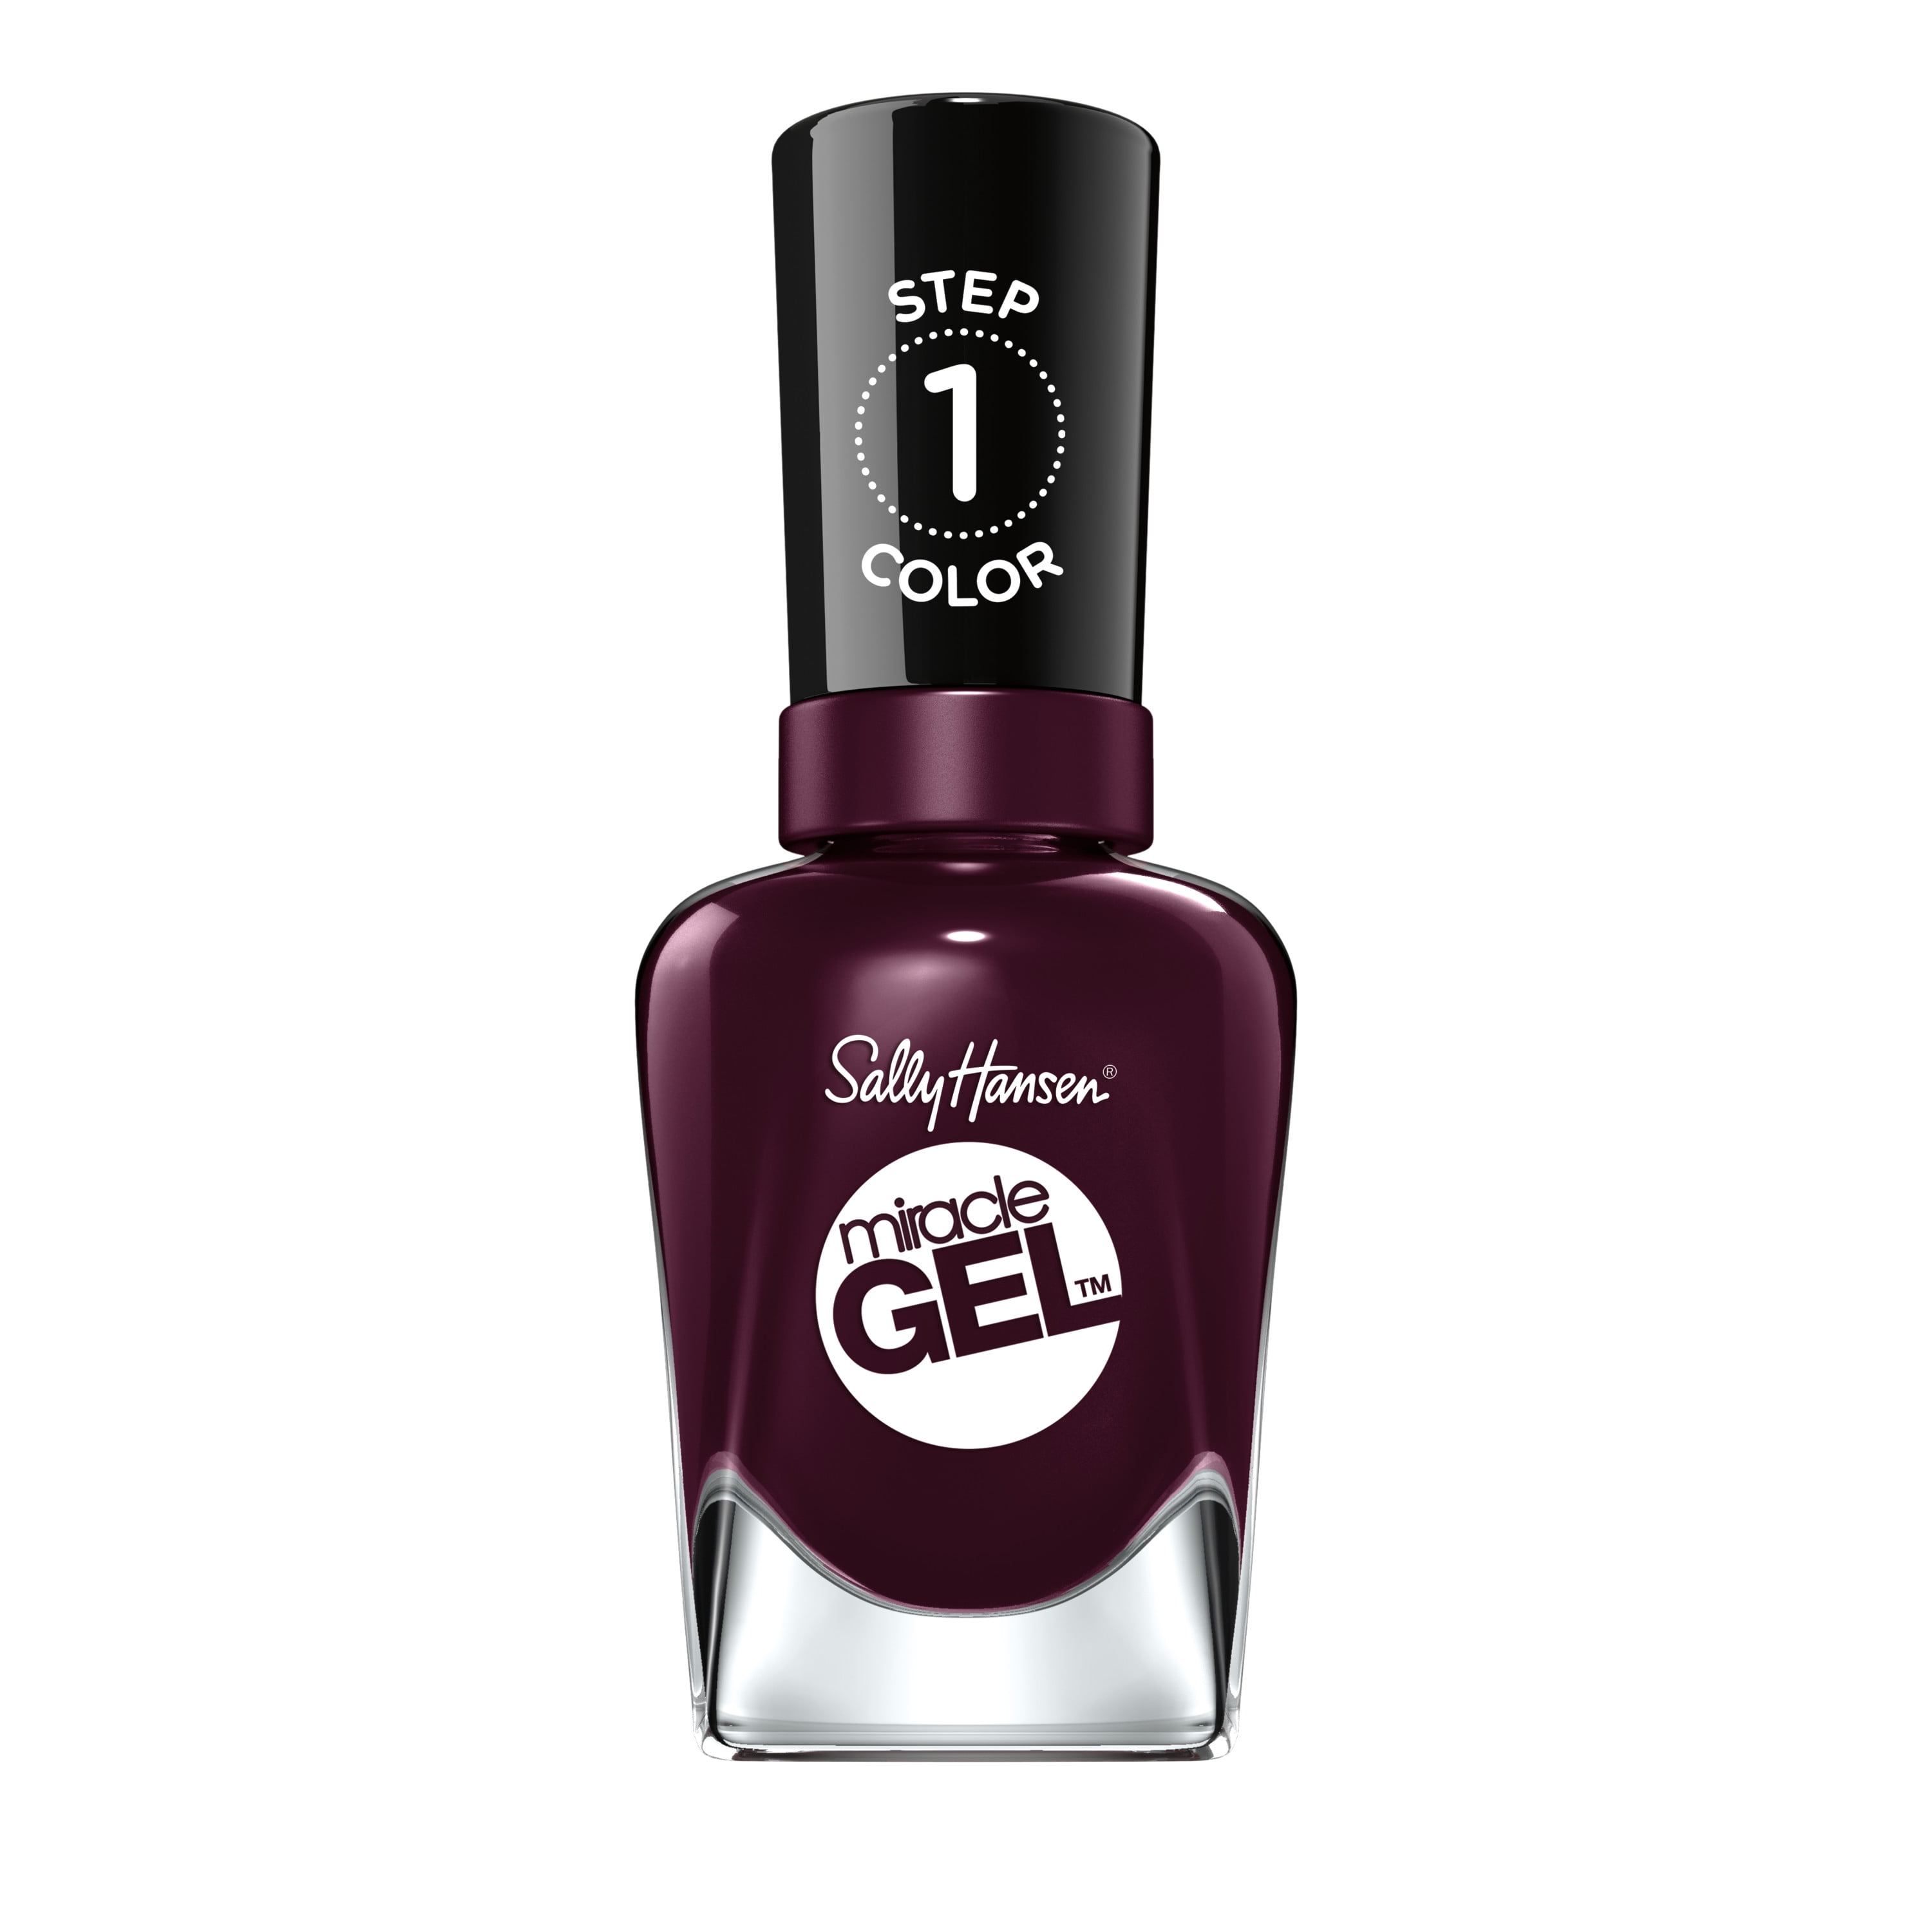 Sally Hansen Miracle Gel Nail Color, Cabernet with Bae, 0.5 oz, At Home Gel Nail Polish, Gel Nail Polish, No UV Lamp Needed, Long Lasting, Chip Resistant